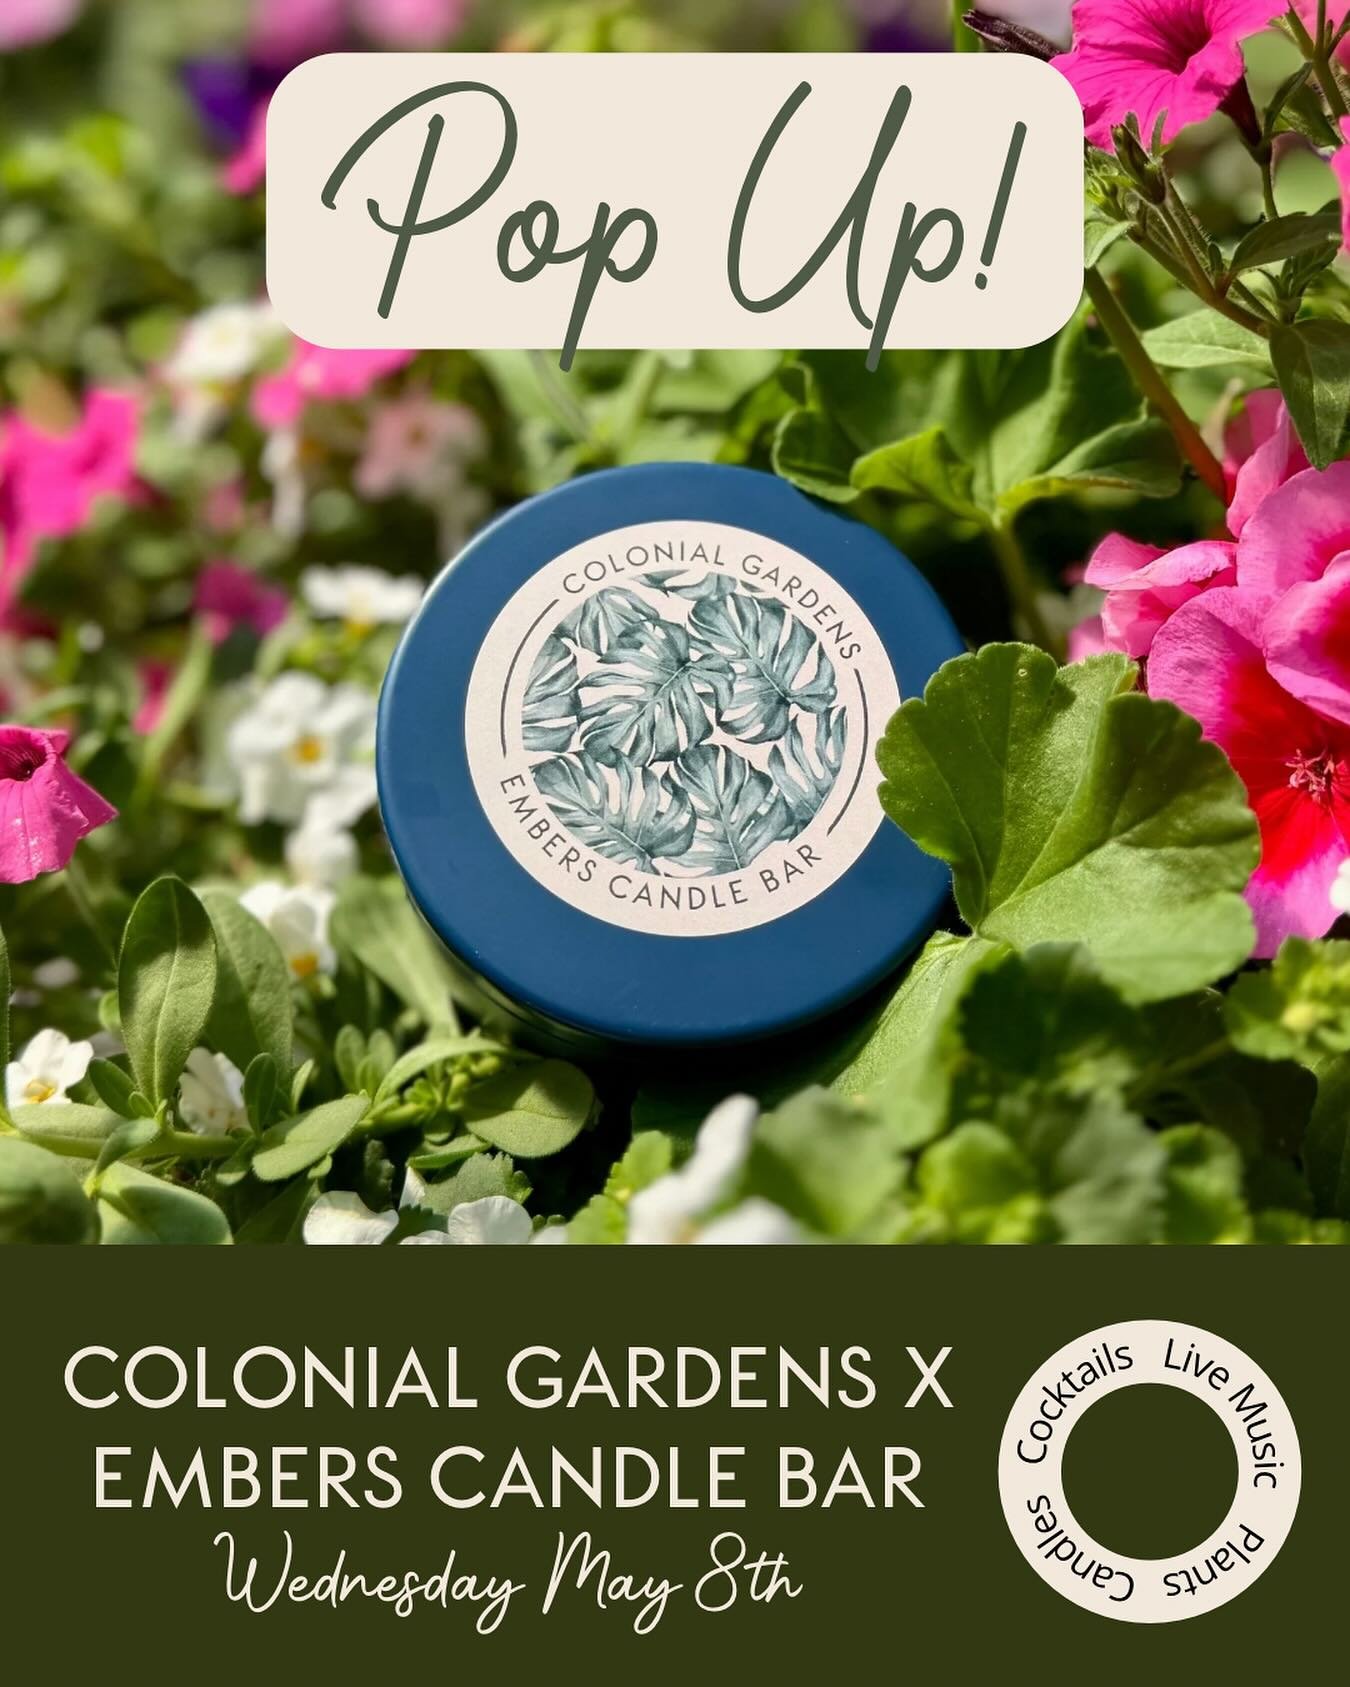 **POP UP** Love plants and candles? If you&rsquo;re following us, you clearly do. Join us on Wednesday May 8th for our pop up at Colonial Gardens. Make a custom candle and enjoy a cocktail as you enjoy live music on their patio. Get your tickets at t